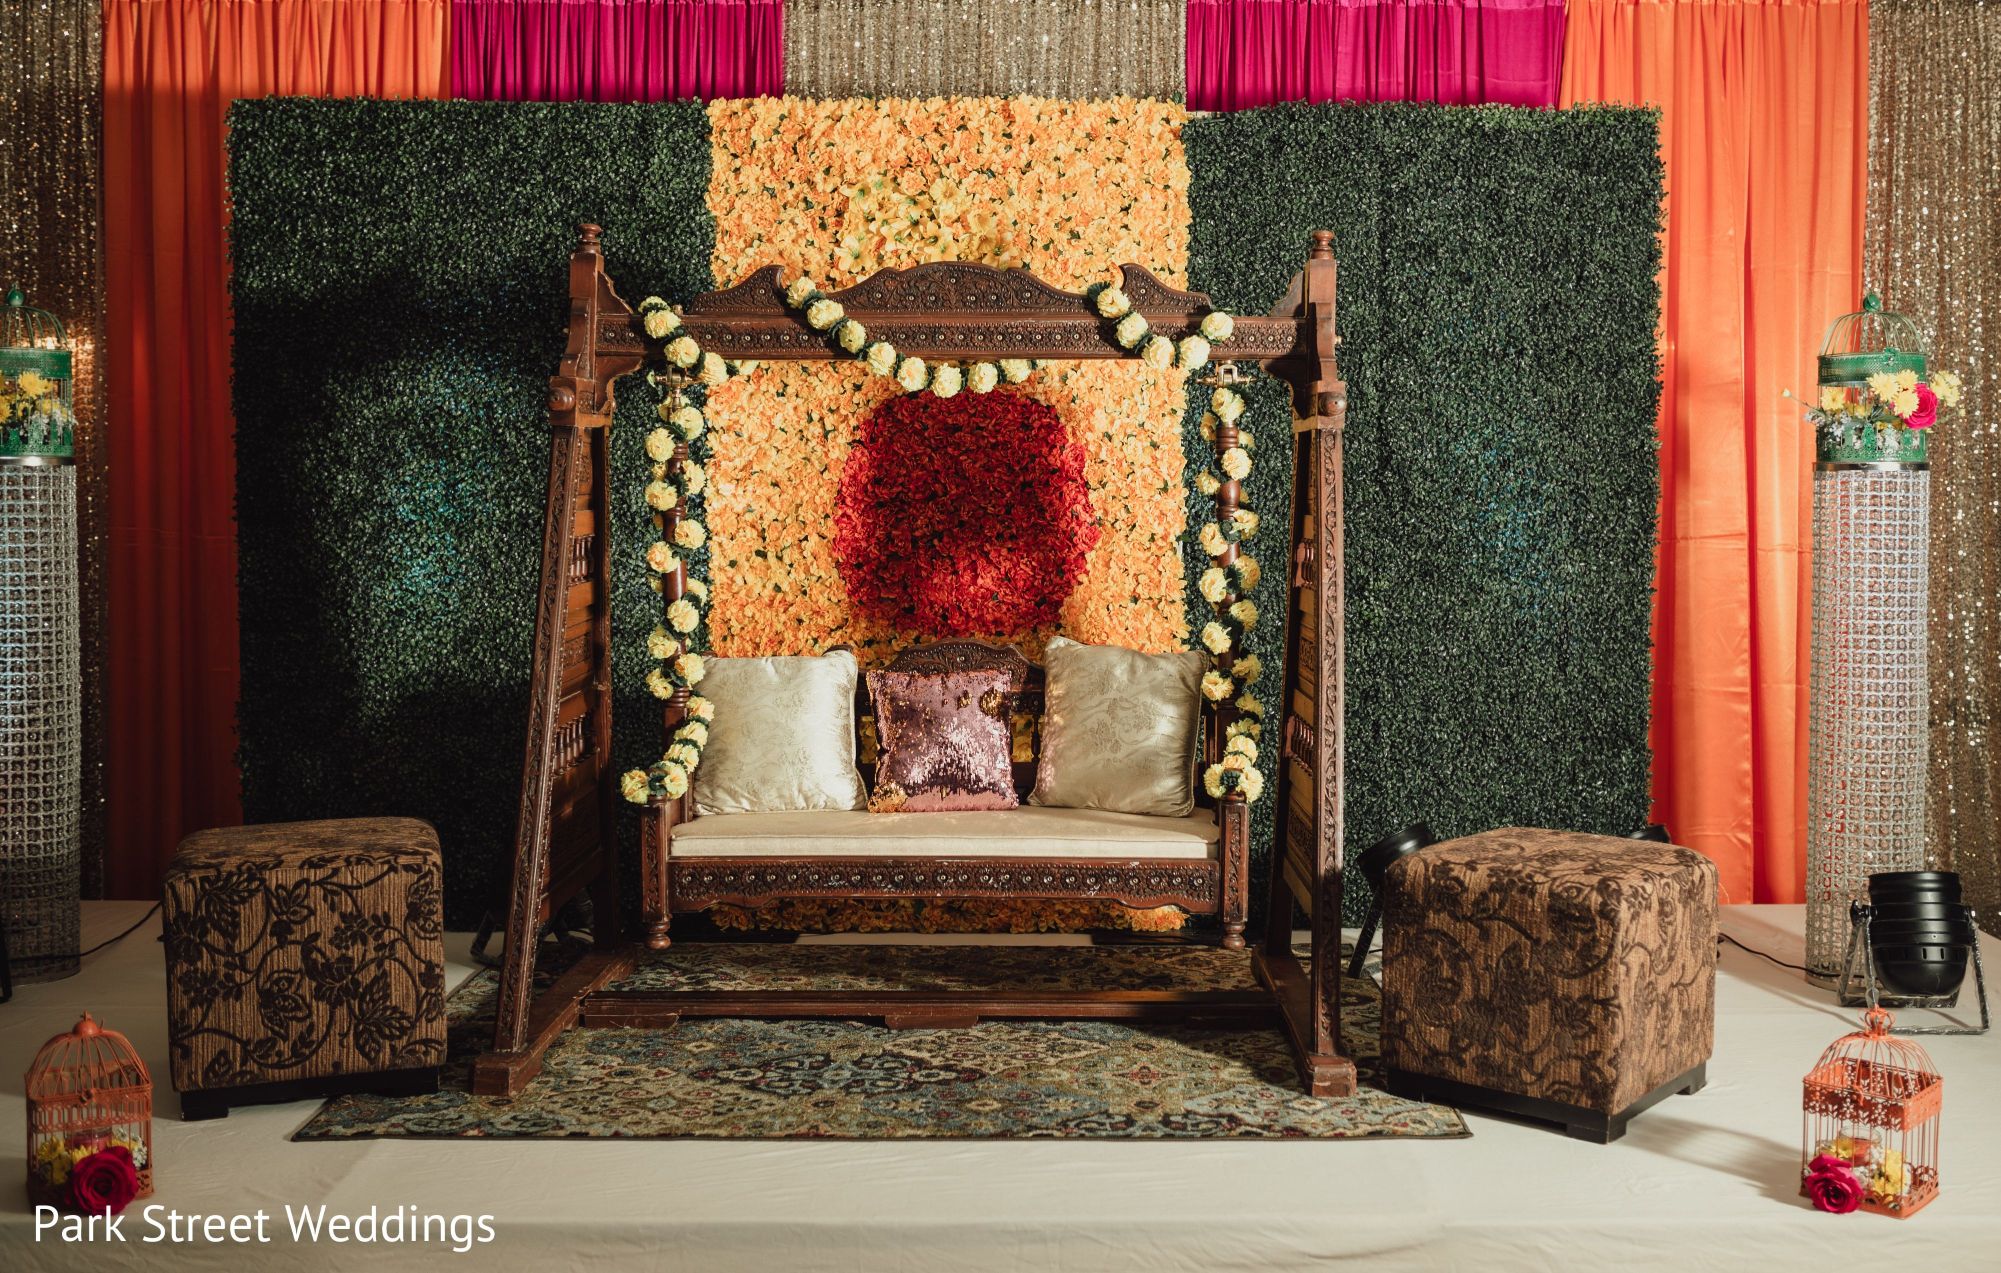 Traditional Indian Wedding Decoration Ideas - Infoupdate.org